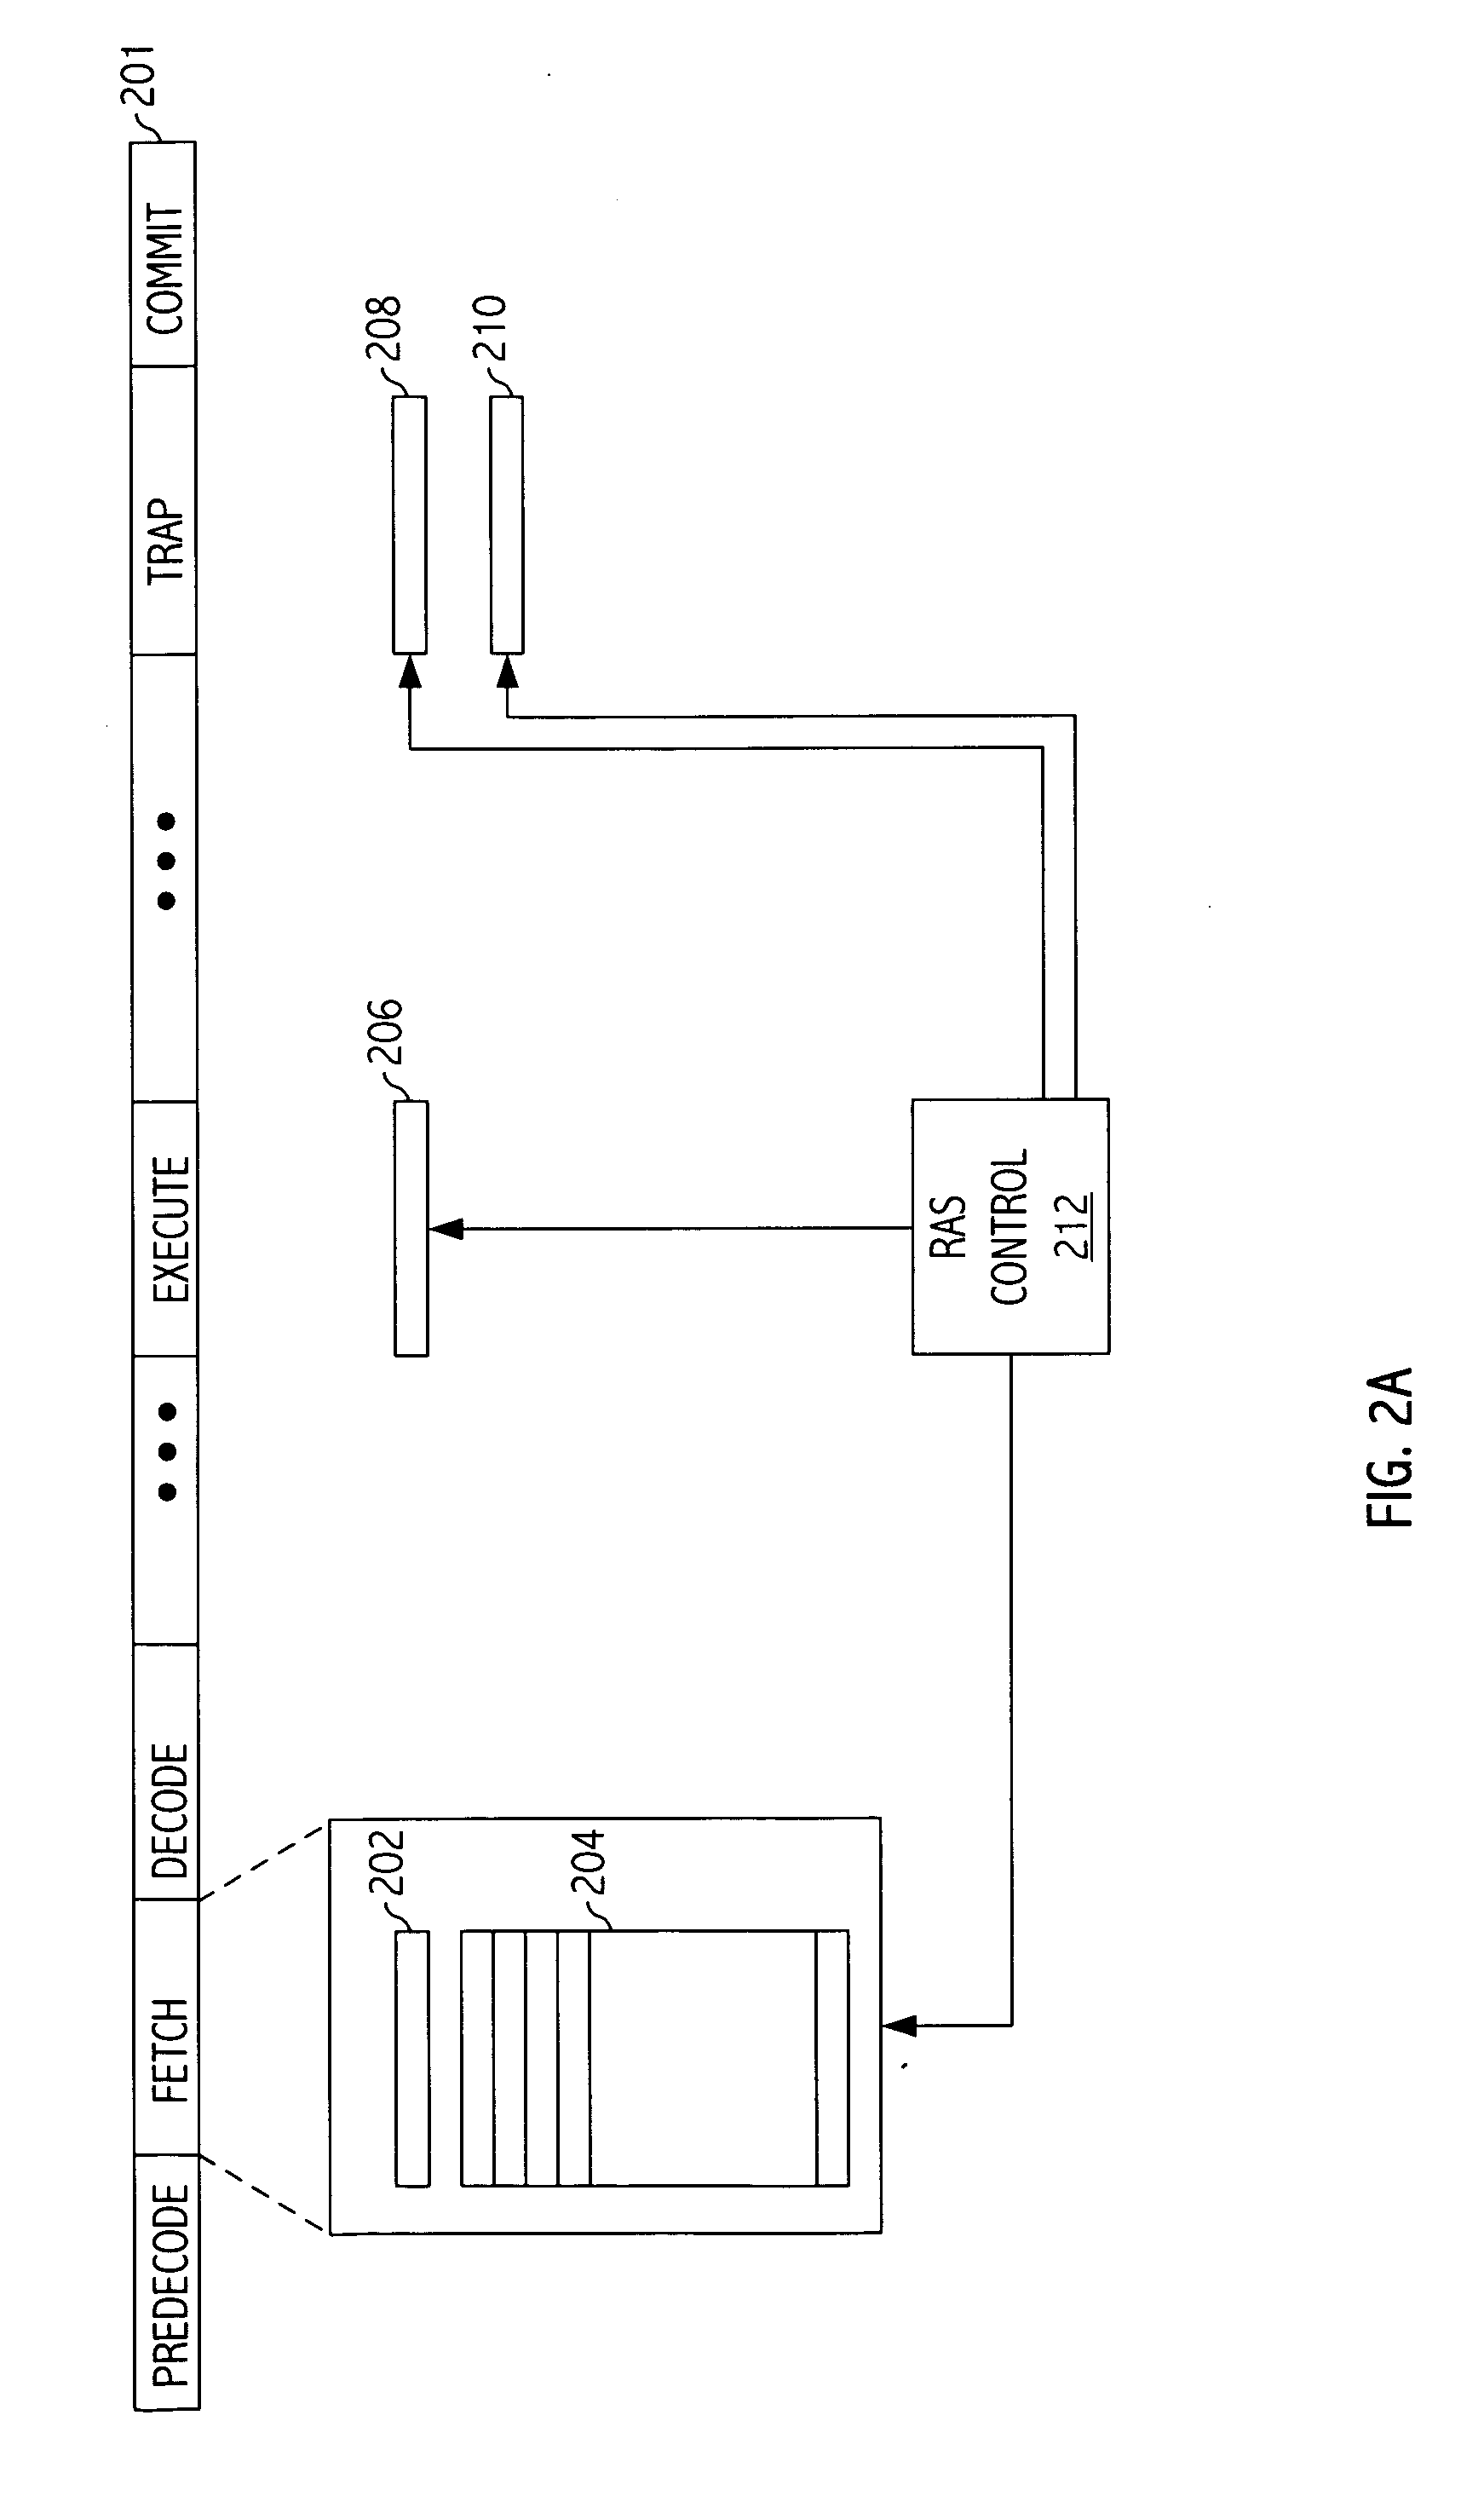 Return address stack recovery in a speculative execution computing apparatus